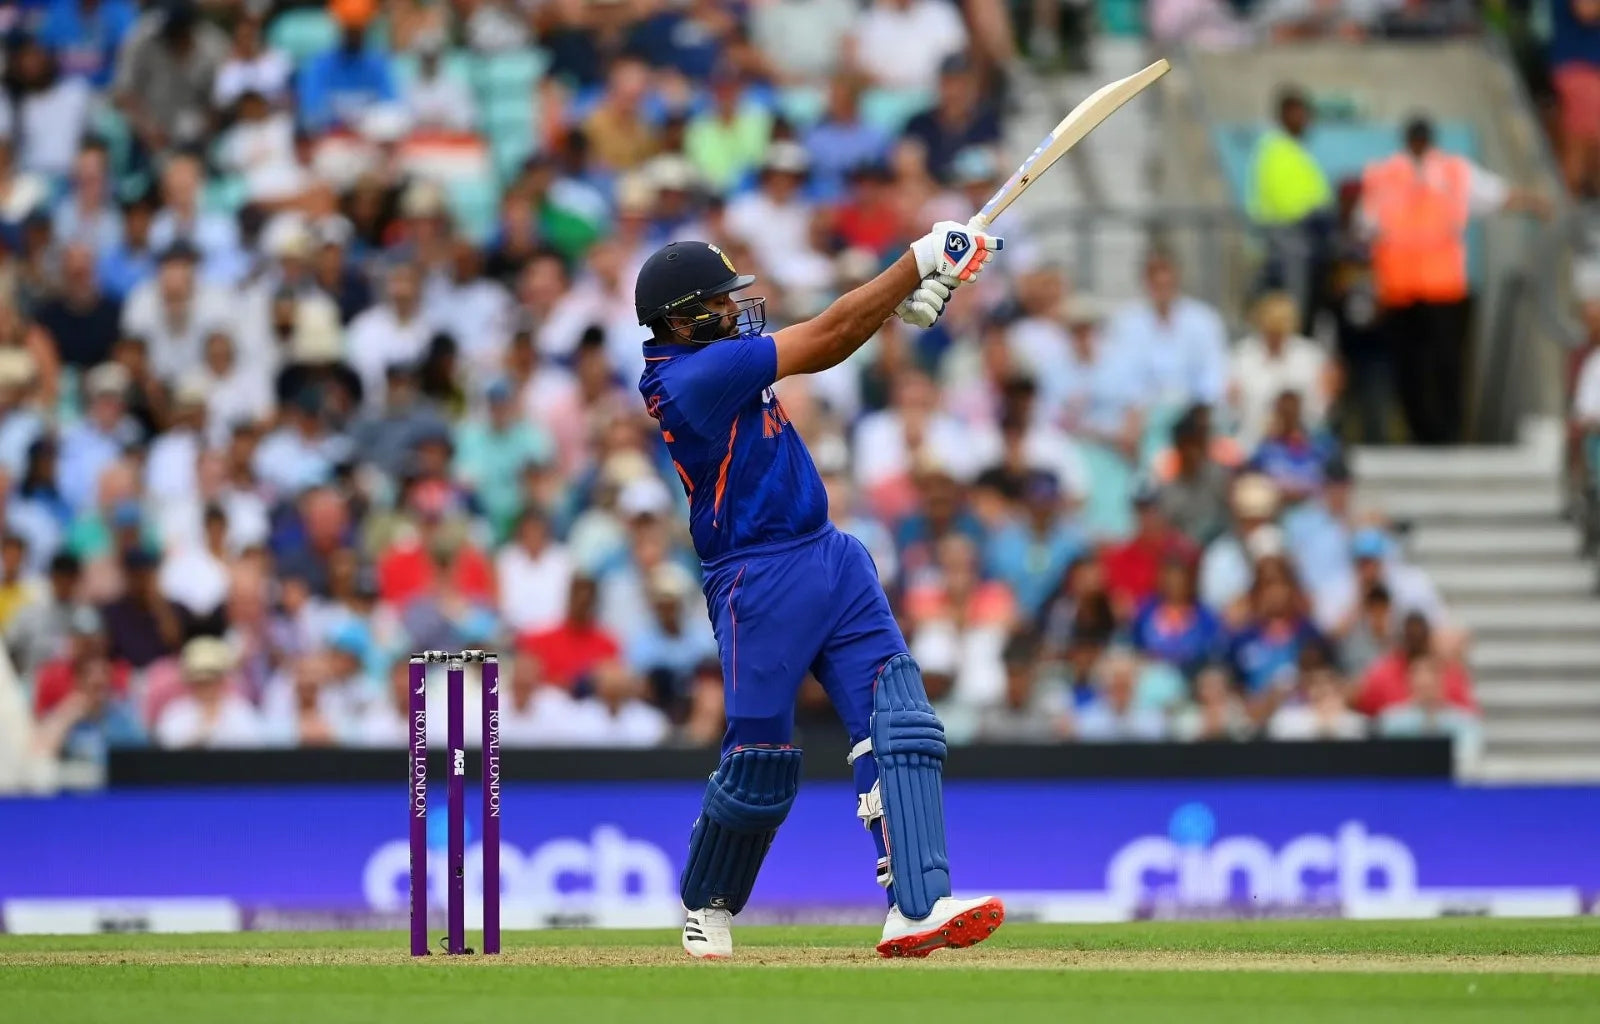 Rohit Sharma plays a pull shot while batting in an ODI for India